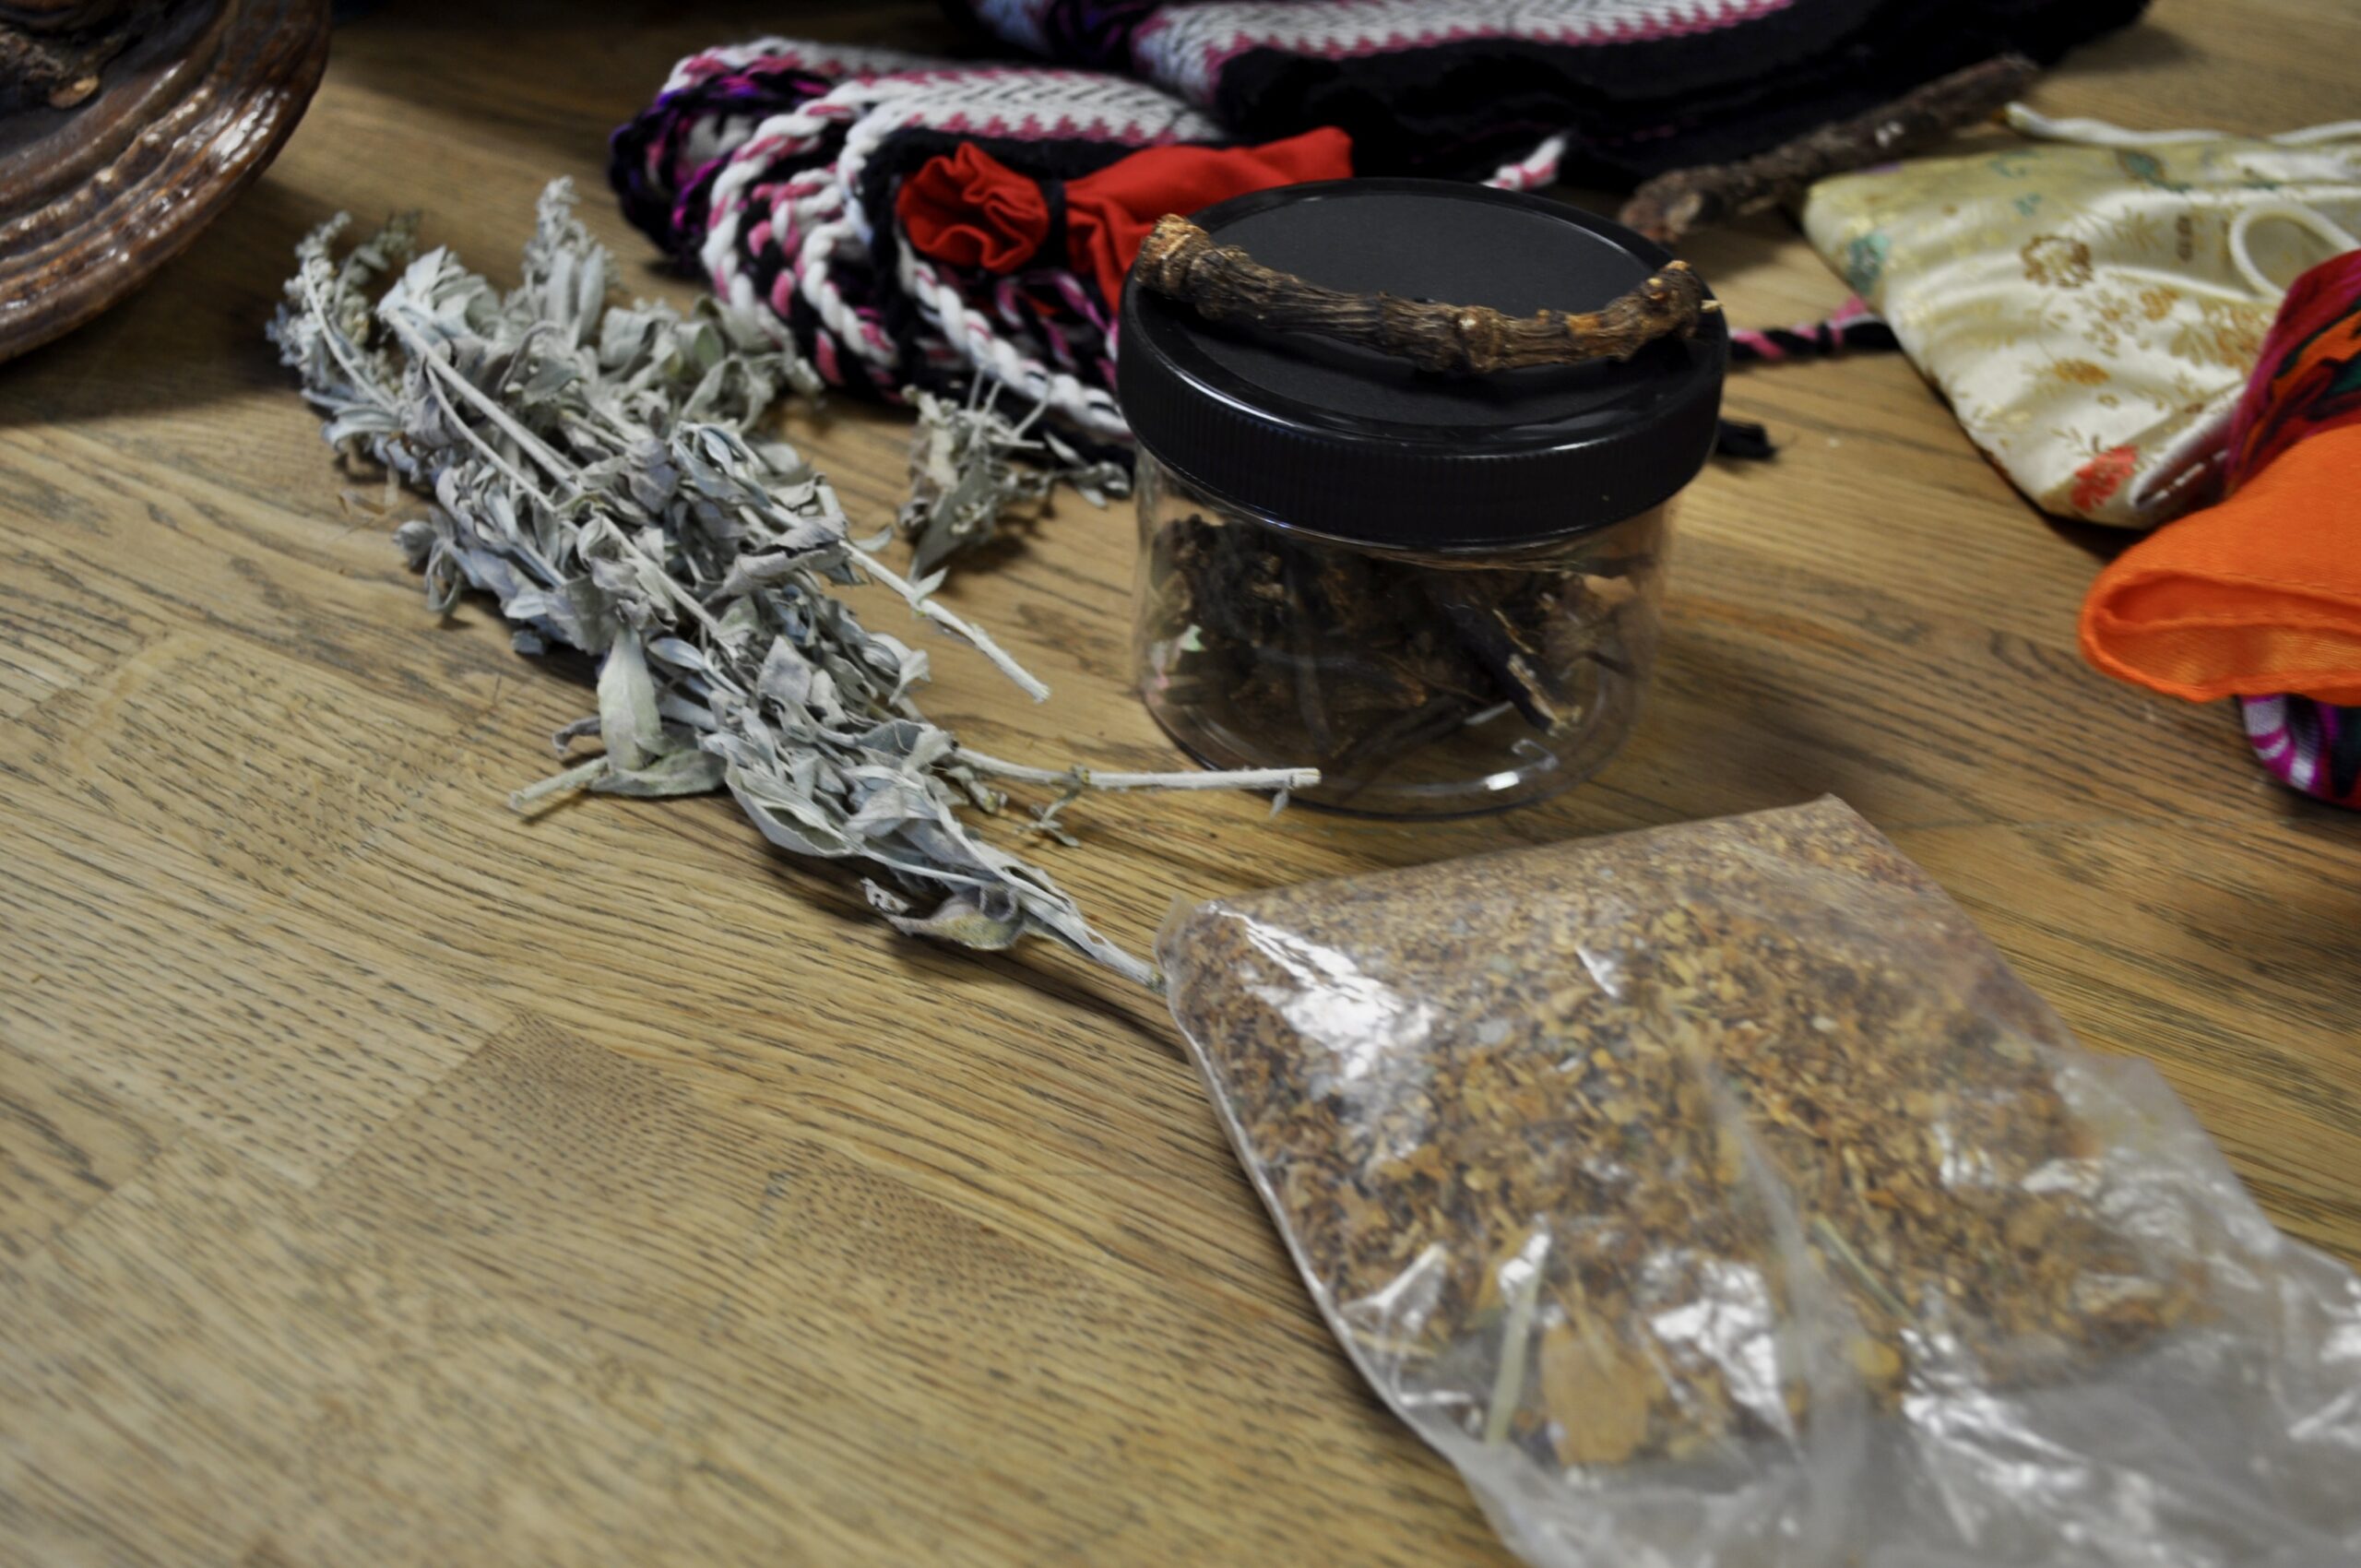 A collection of medicines provided by Kalyn Kodiak including a jar of bear root, white sage and a bag of tobacco.